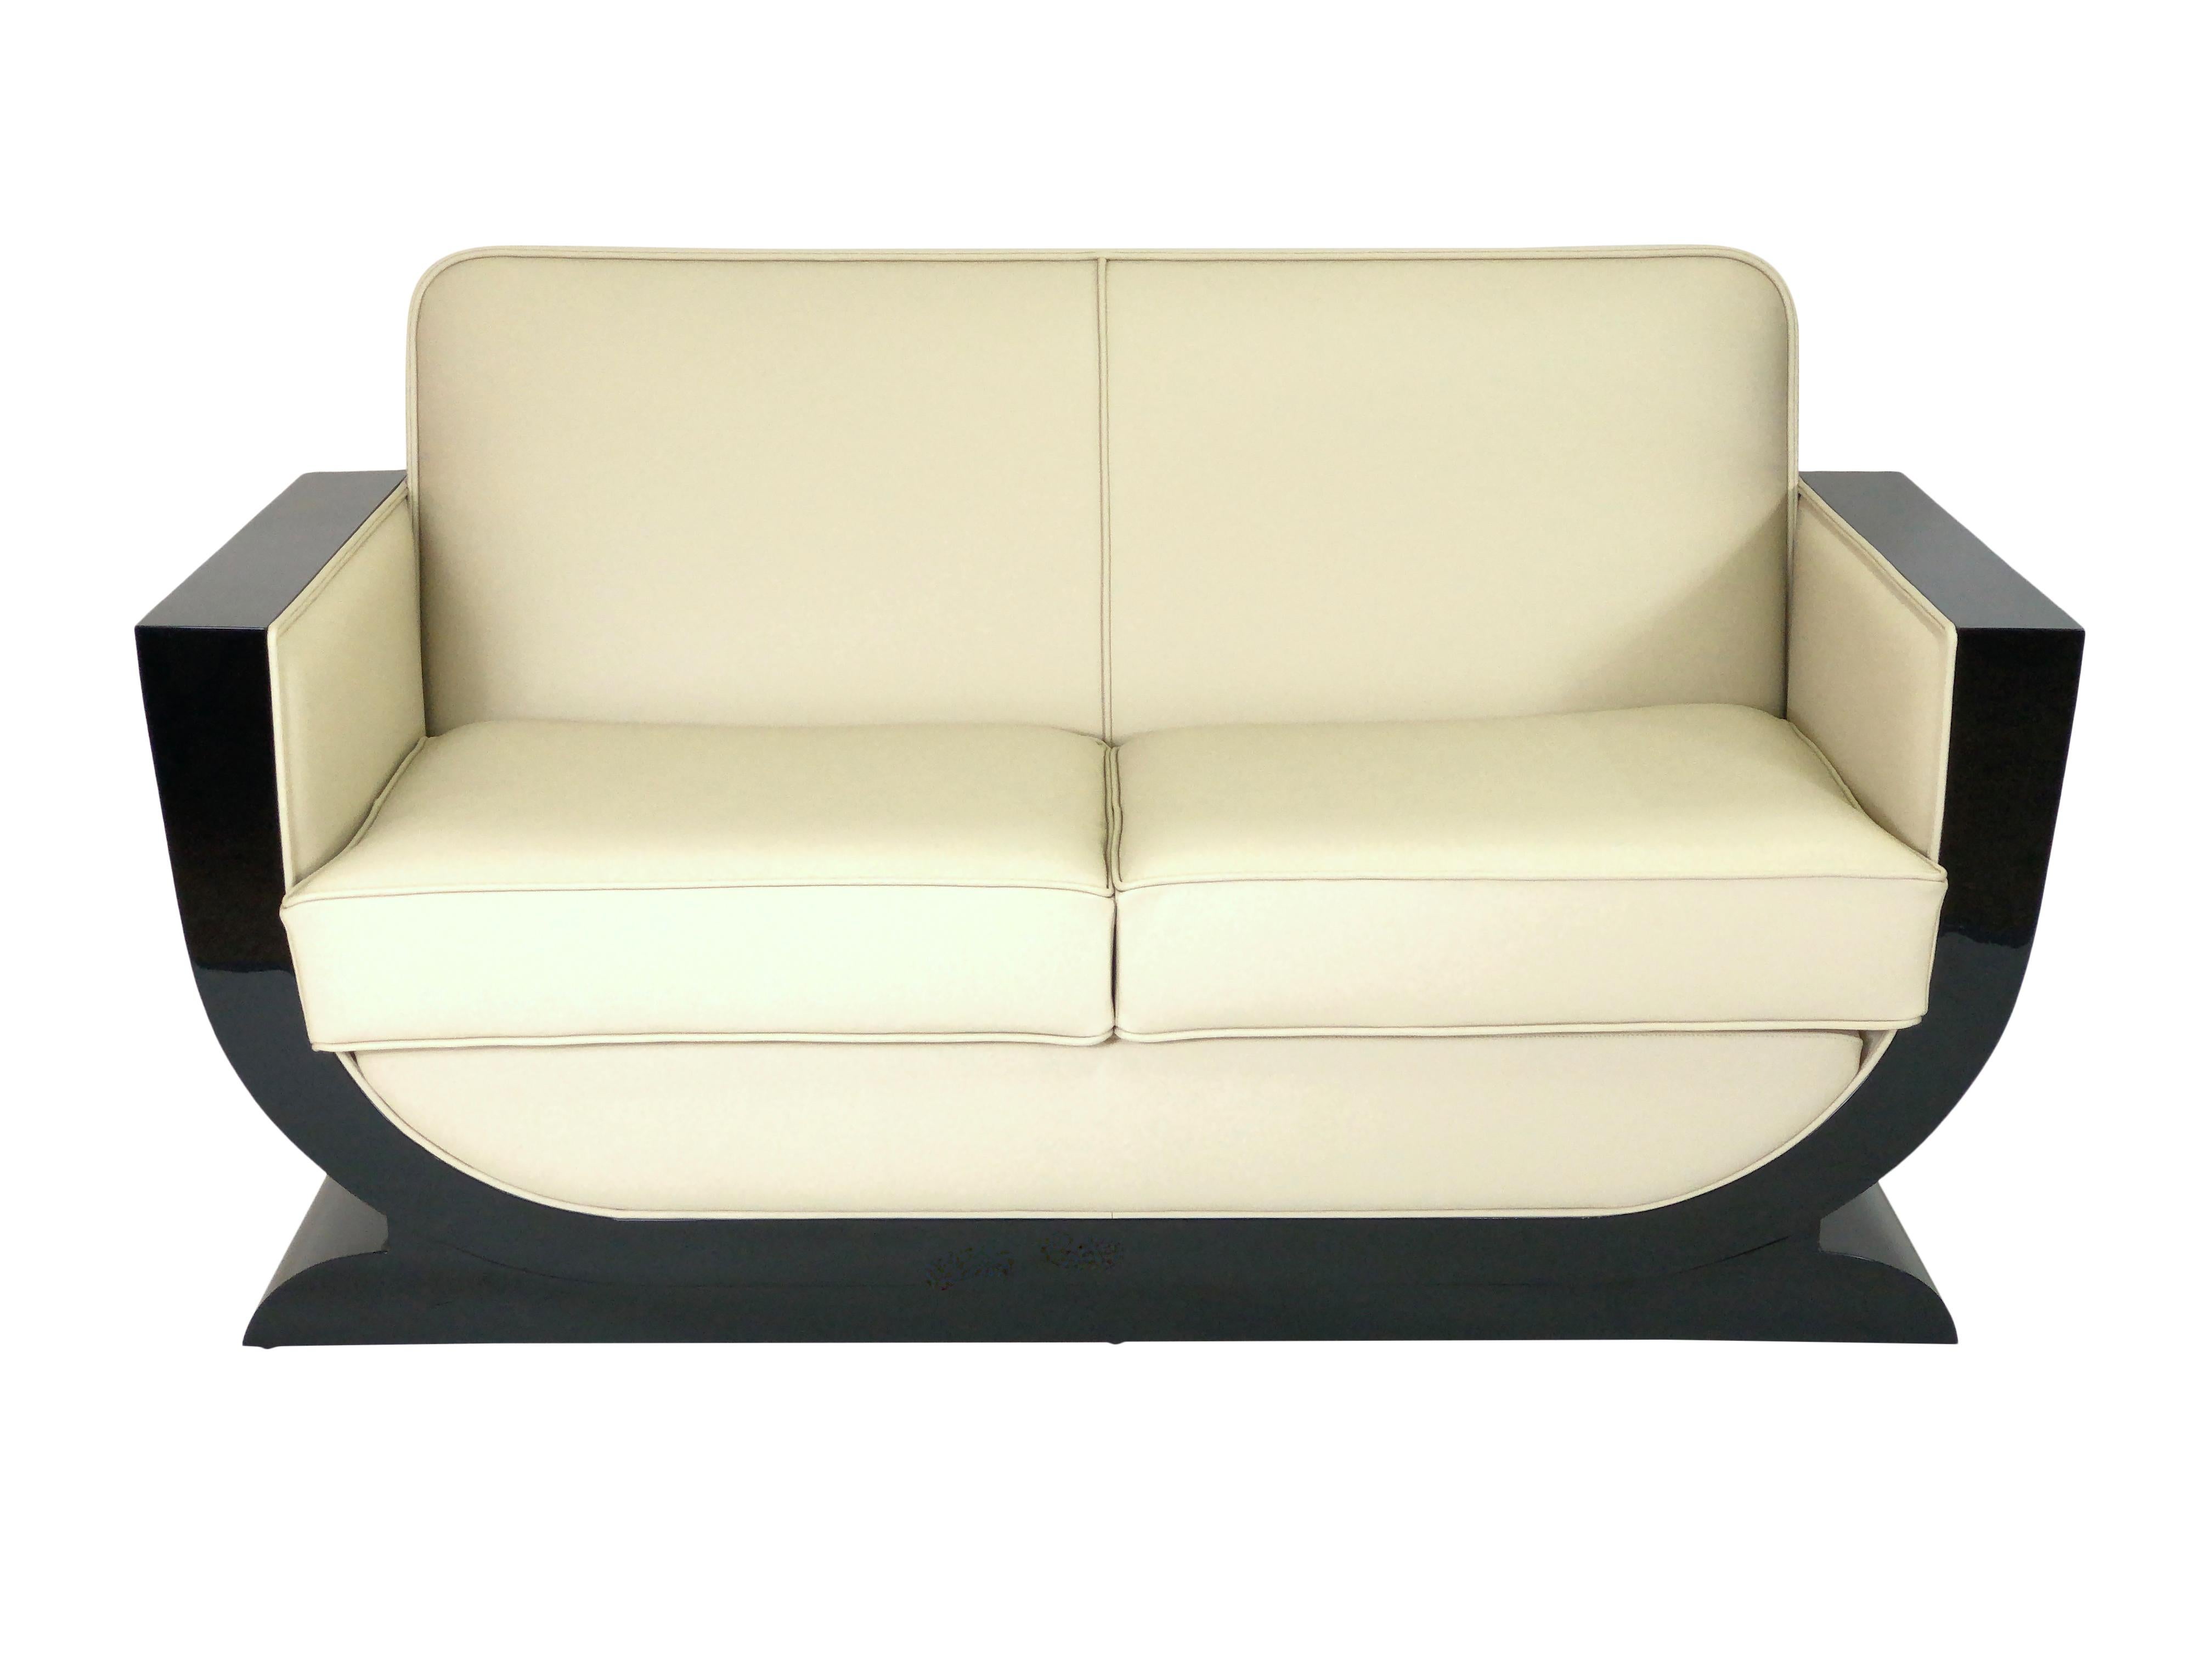 Beige leather on black lacquered wood.

Typical French Art Deco shape.
Elegant and timeless design.

High quality!
Handmade in Germany.
Different upholstery, leather colors, woods, lacquer colors or surface finishes on request.

The